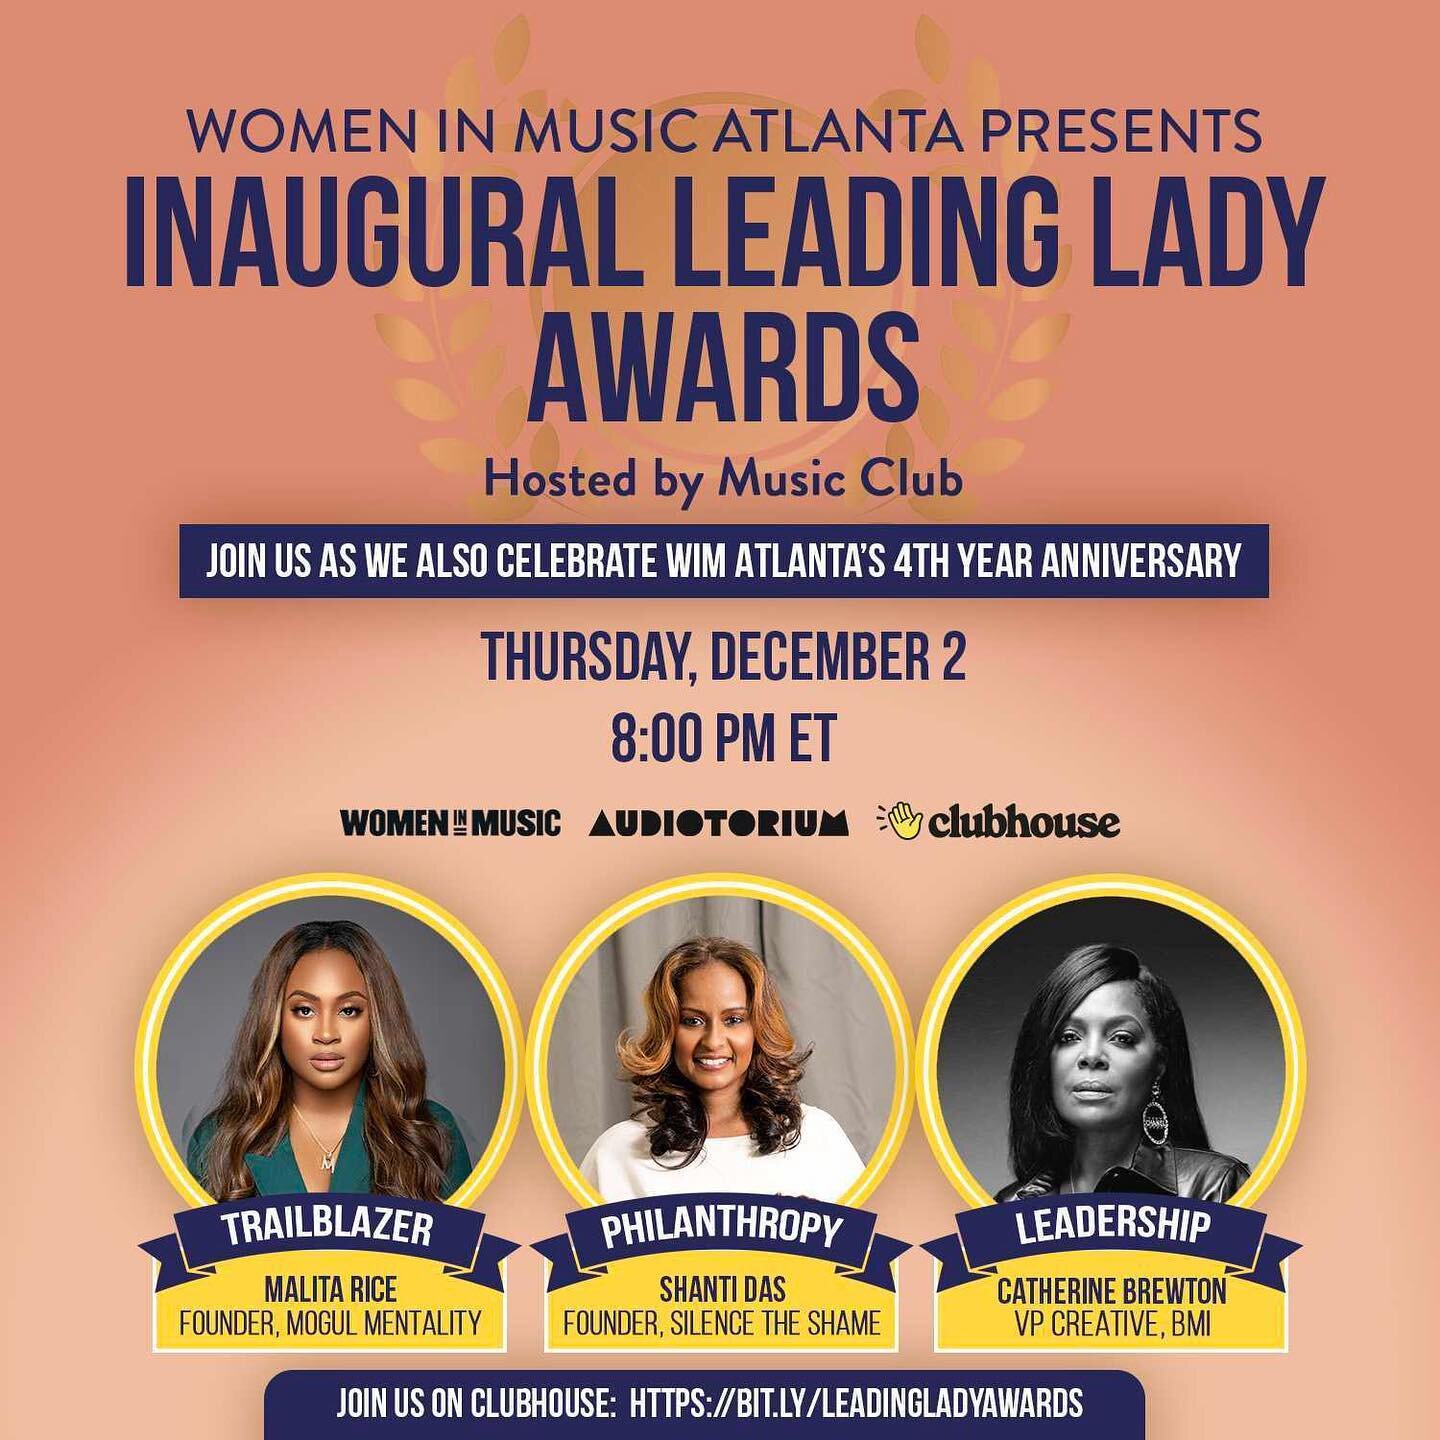 Tonight, we are celebrating WIM Atlanta's 4th Anniversary on @clubhouse in Music Club hosted by @audiotoriumlive by kicking off our inaugural Leading Lady Awards. 🎼
.
We are honored for Music Club to be hosting this with as we recognize three women 